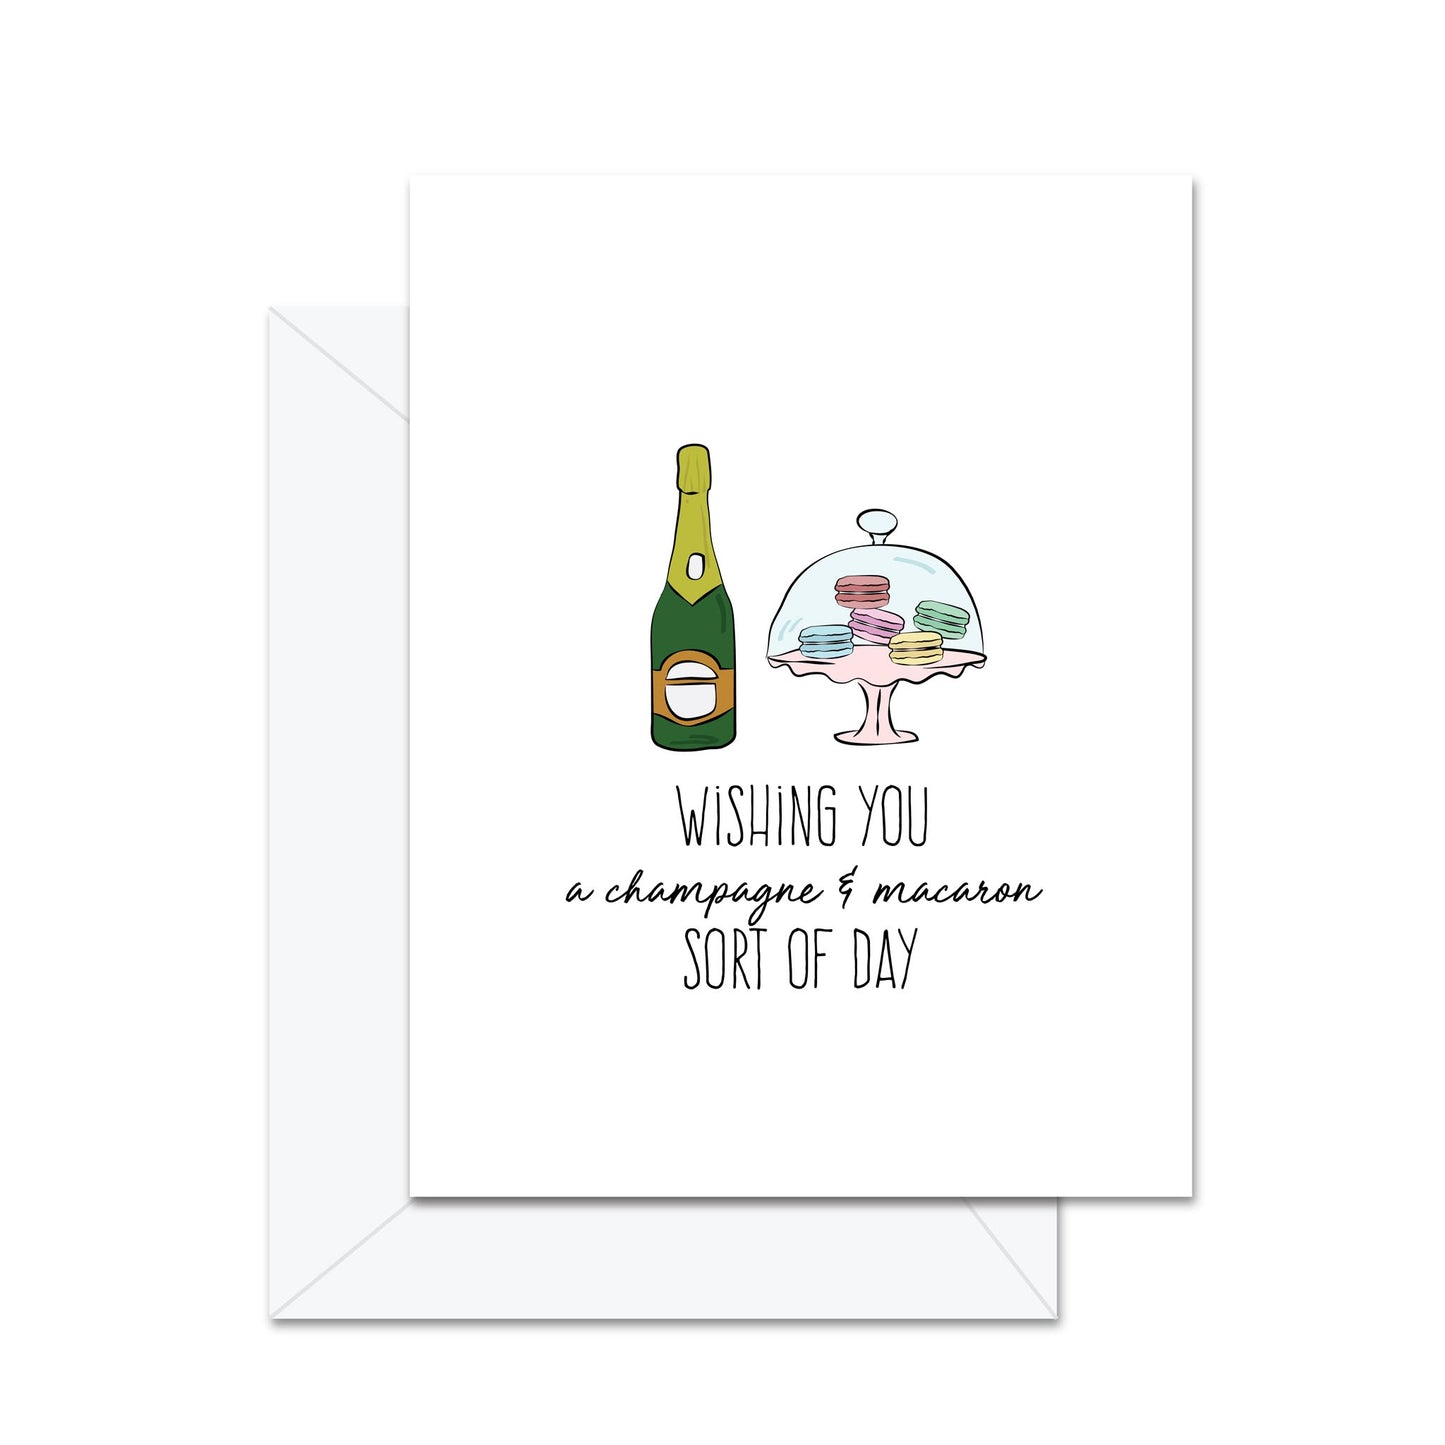 Wishing You A Champagne & Macaron Sort Of Day - Greeting Card